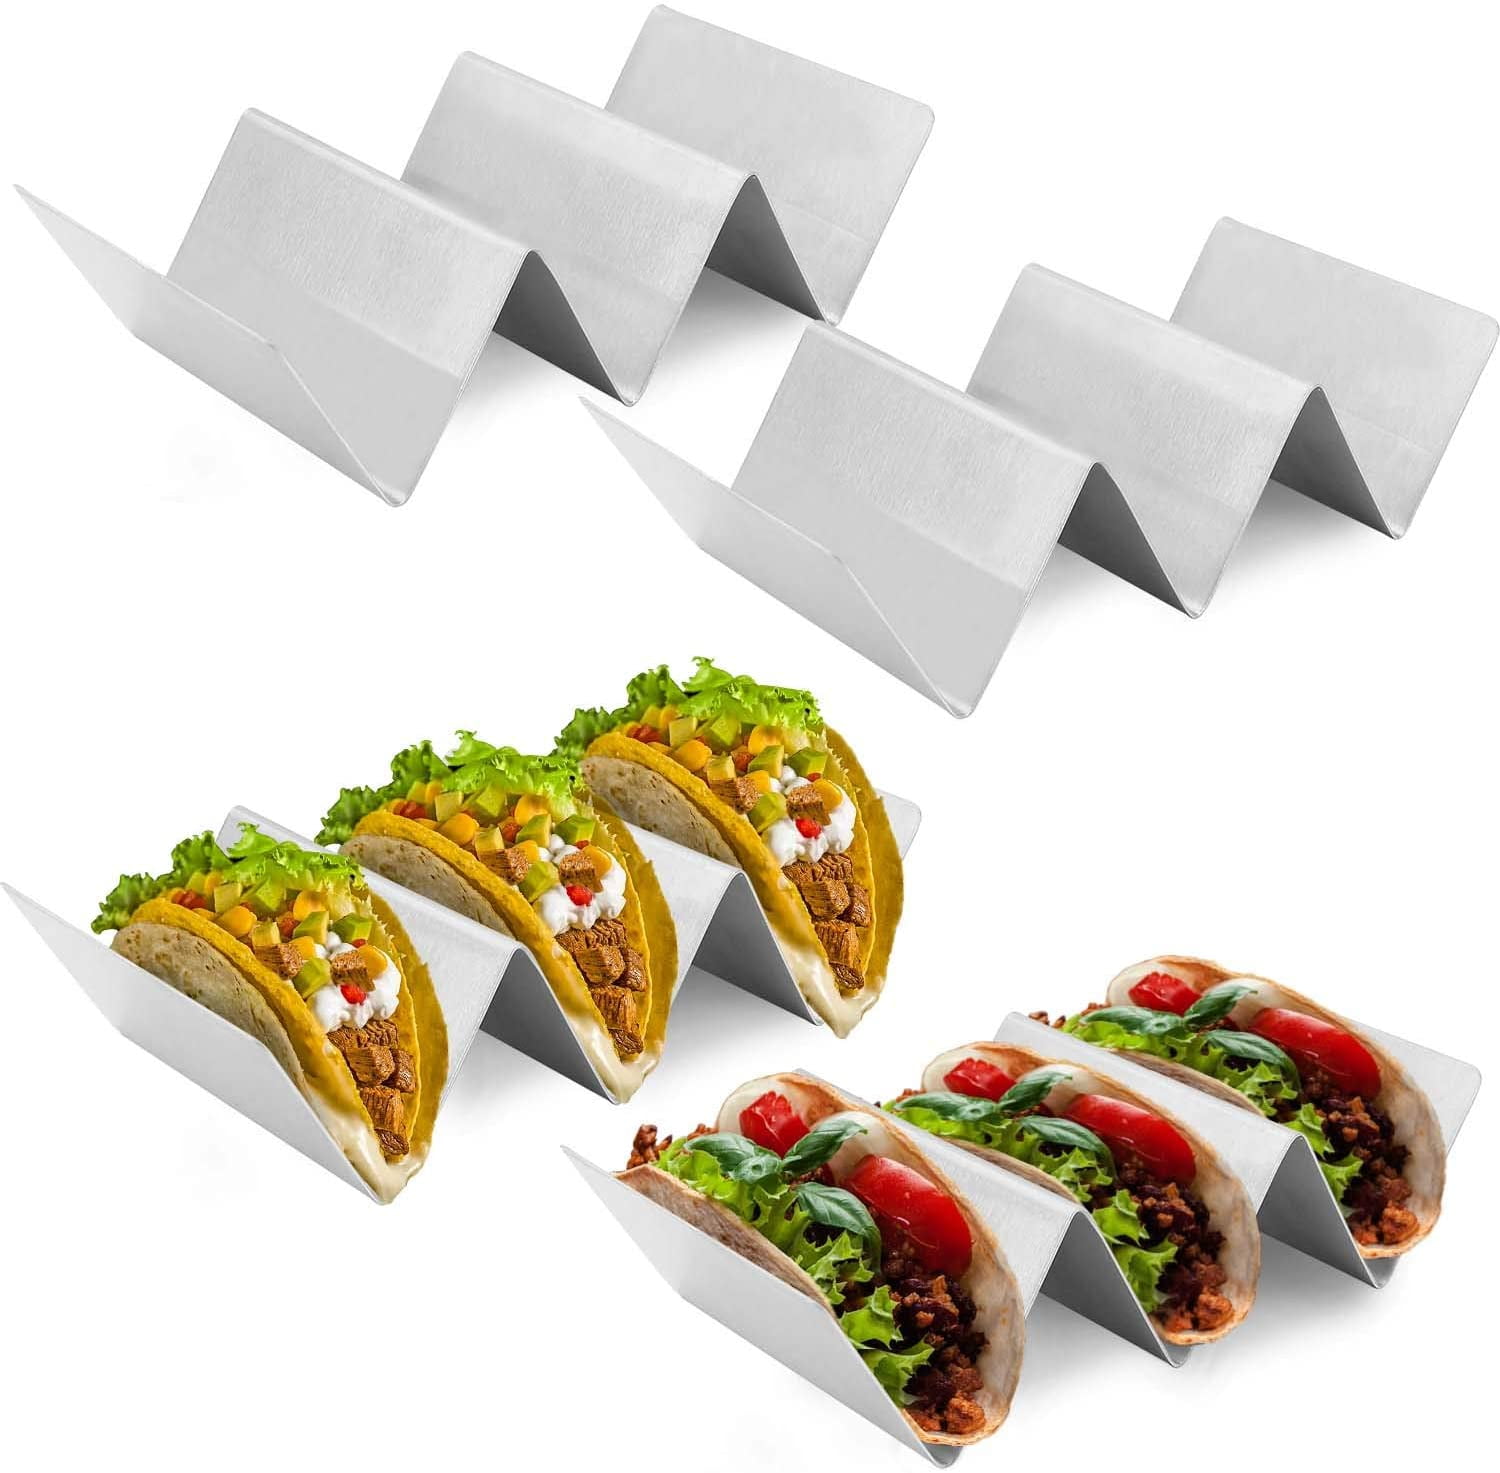 Dishwasher 4 x 8 Inch Taco Rack For 3 Hard or Soft Shell Tacos with 4 Cups Stainless Steel Taco Holder Stand Reheating & Serving Oven & Grill Safe Taco Truck Tray Style For Baking Set of 2 